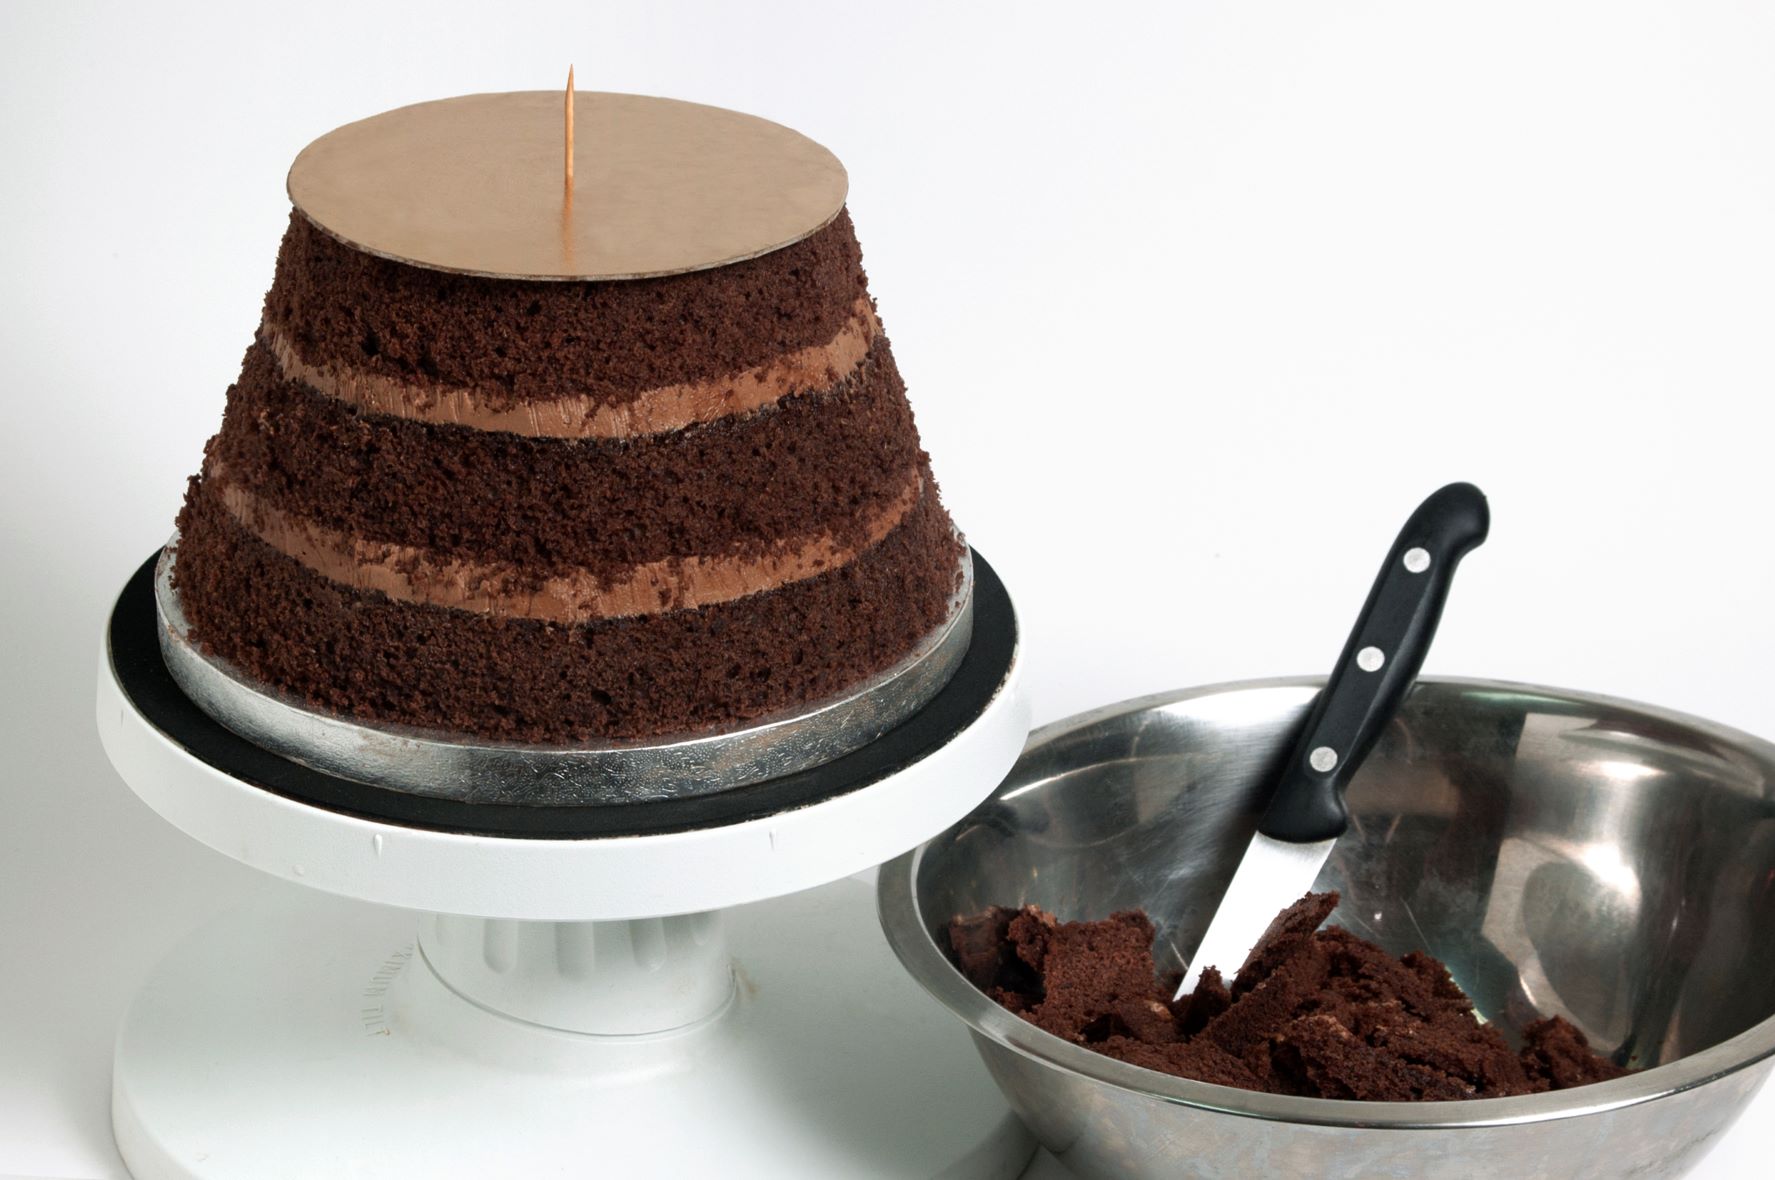 Place the 8” cake on a turntable and put the largest of the cake boards you have just trimmed on top.